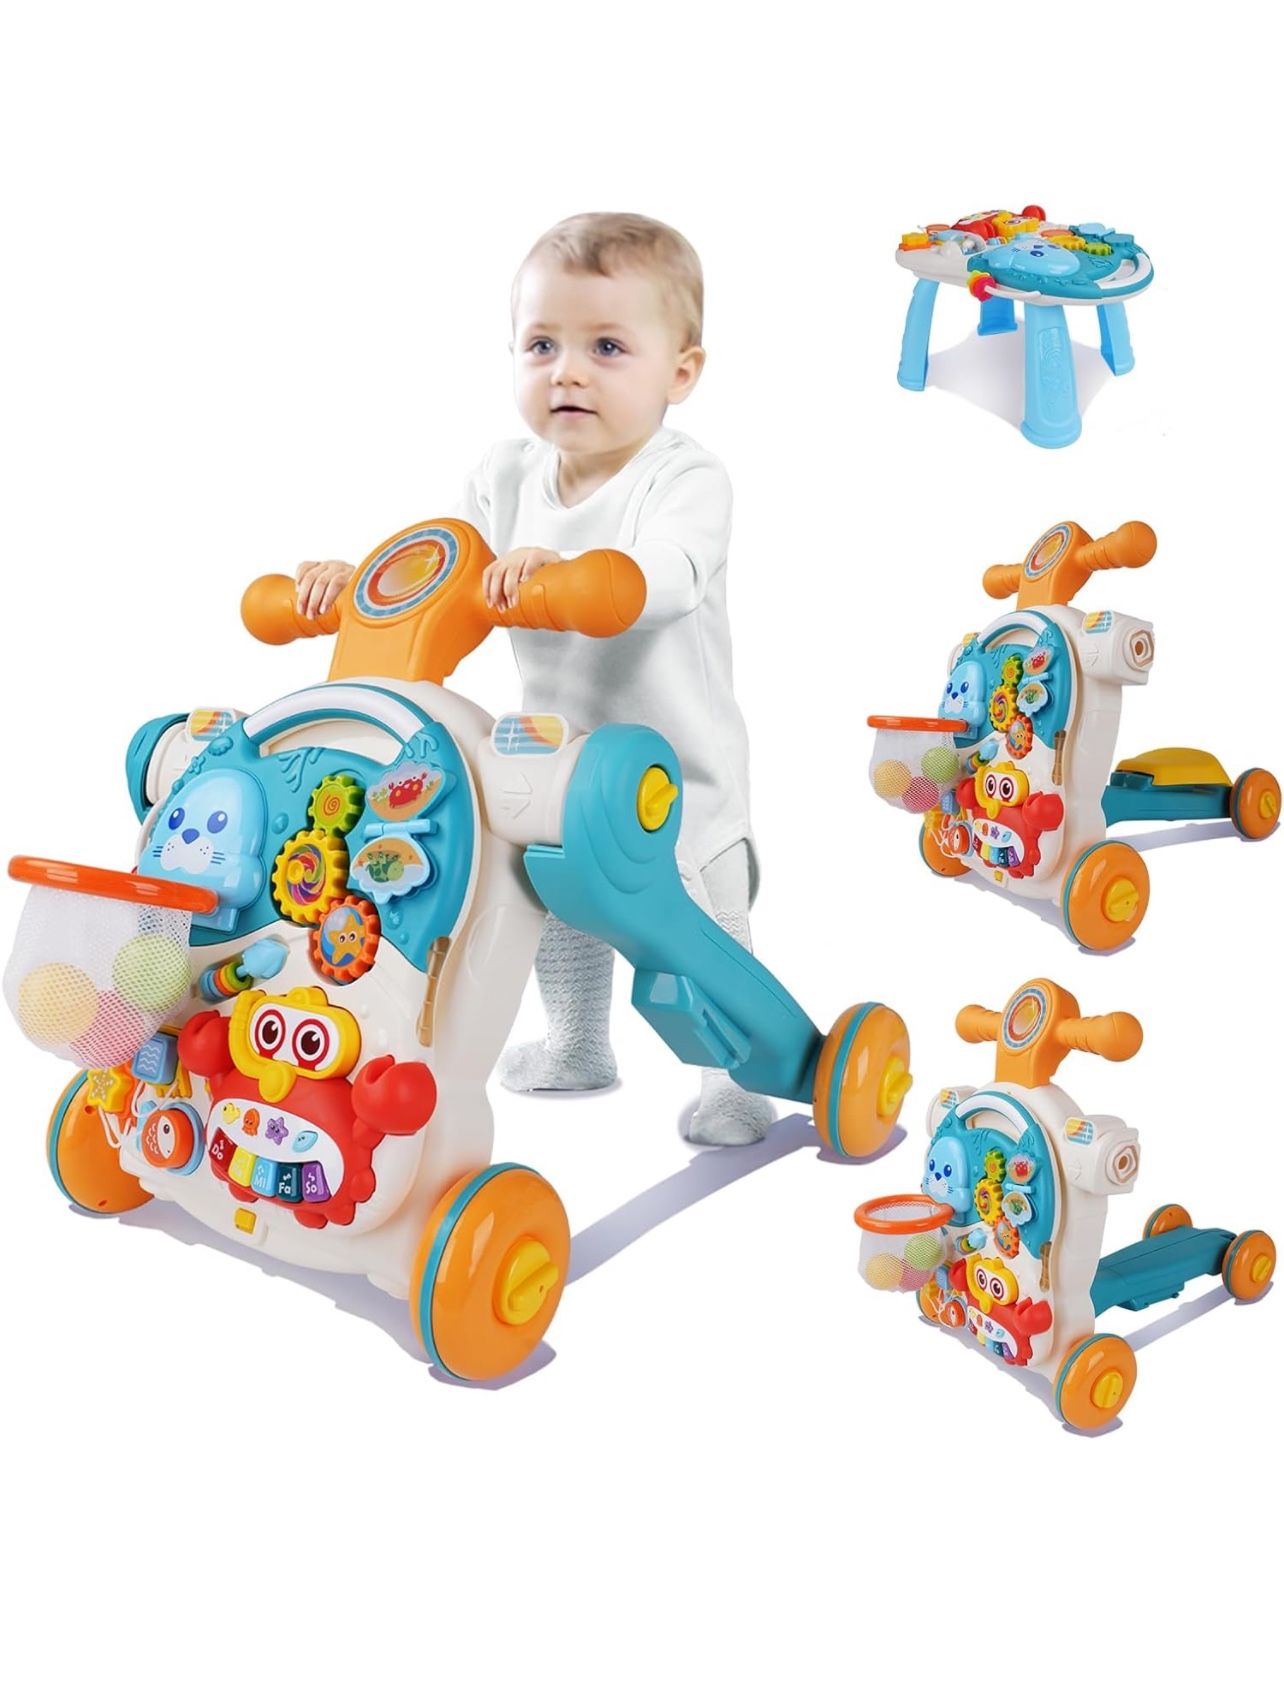 Brandnew 5 in 1 Baby Push Walkers and Activity Center, Sit-to-Stand Learning Walker, Assemble As Scooter/Motorbike/Activity Center/Detachable Panel, W